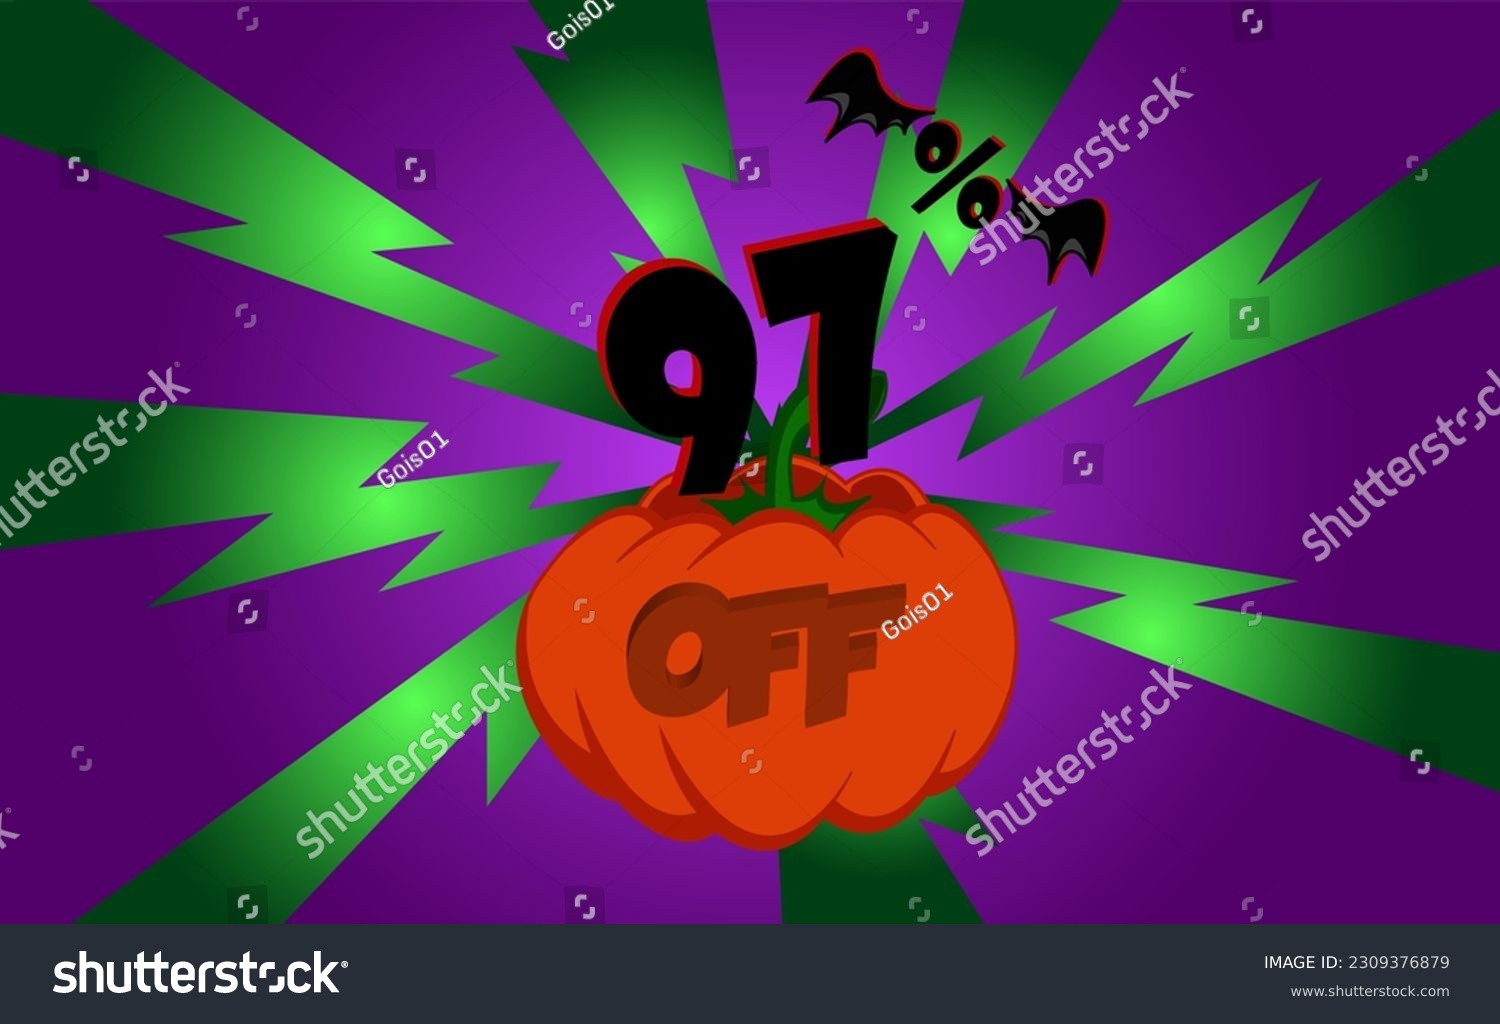 SVG of 97 percent off. Banner, with pumpkin, green rays and purple background with gradient, bat wings, halloween theme. svg